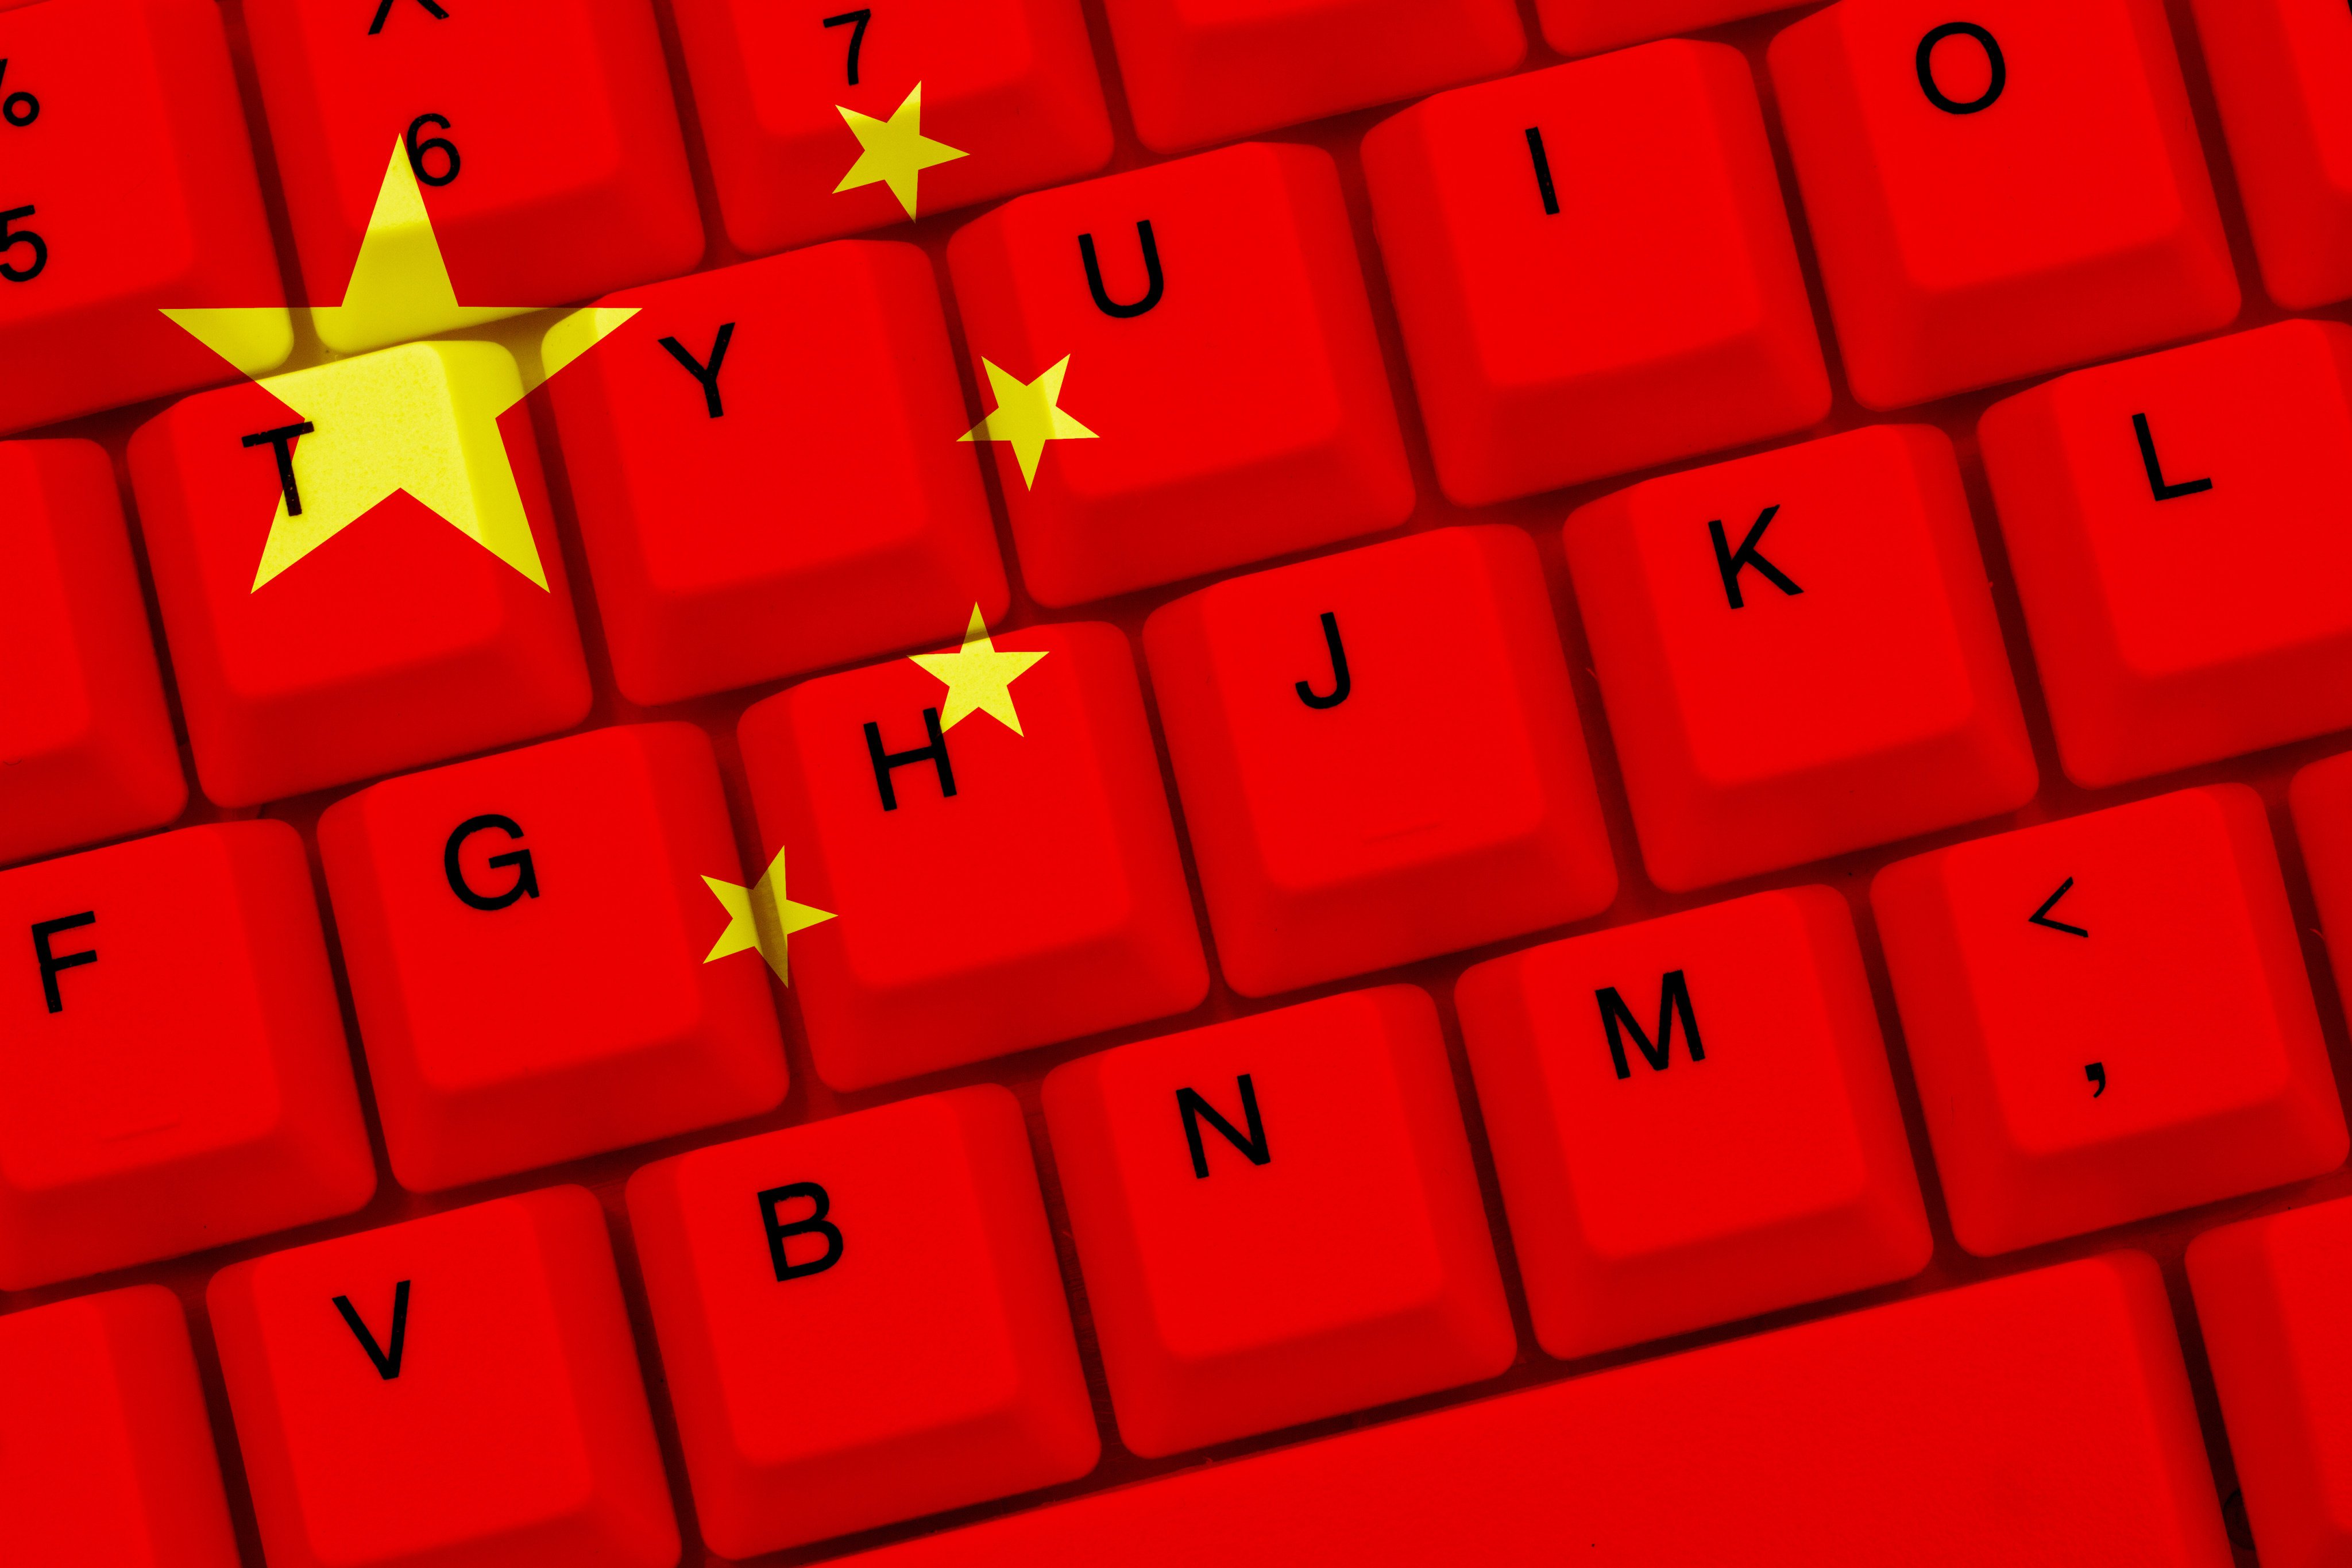 Nationalist voices have grown louder on Chinese social media in recent years, with some zeroing in on companies. Photo: Shutterstock Images